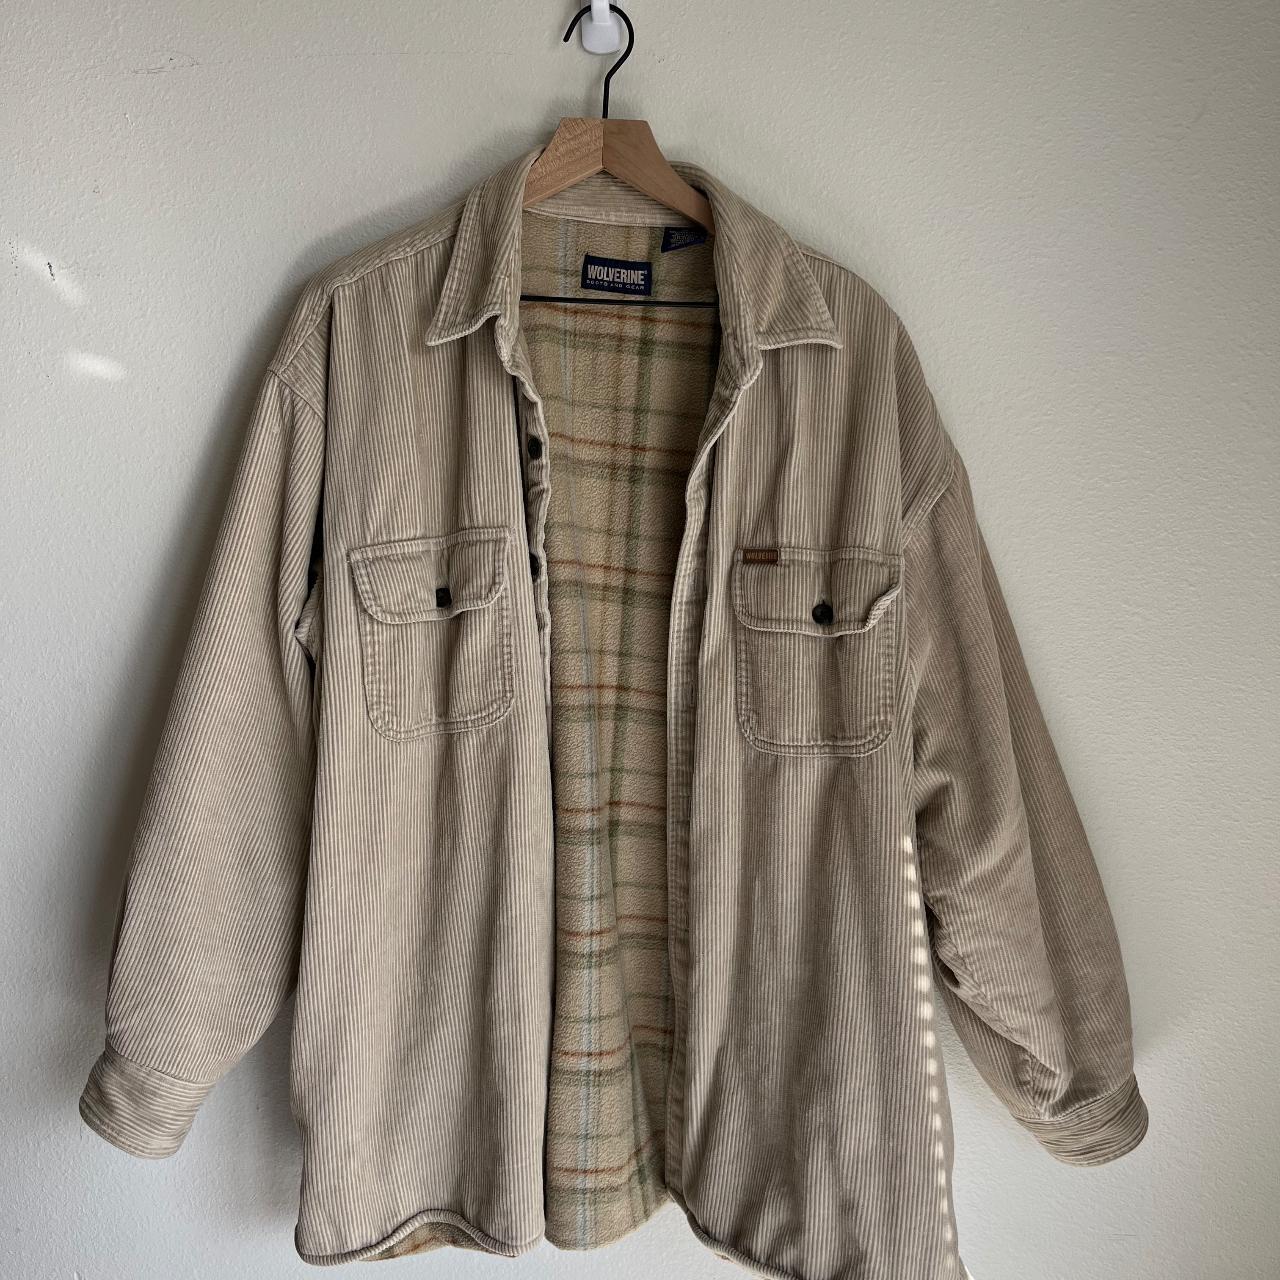 Wolverine Corduroy Shirt Jacket Size XL Lined with... - Depop